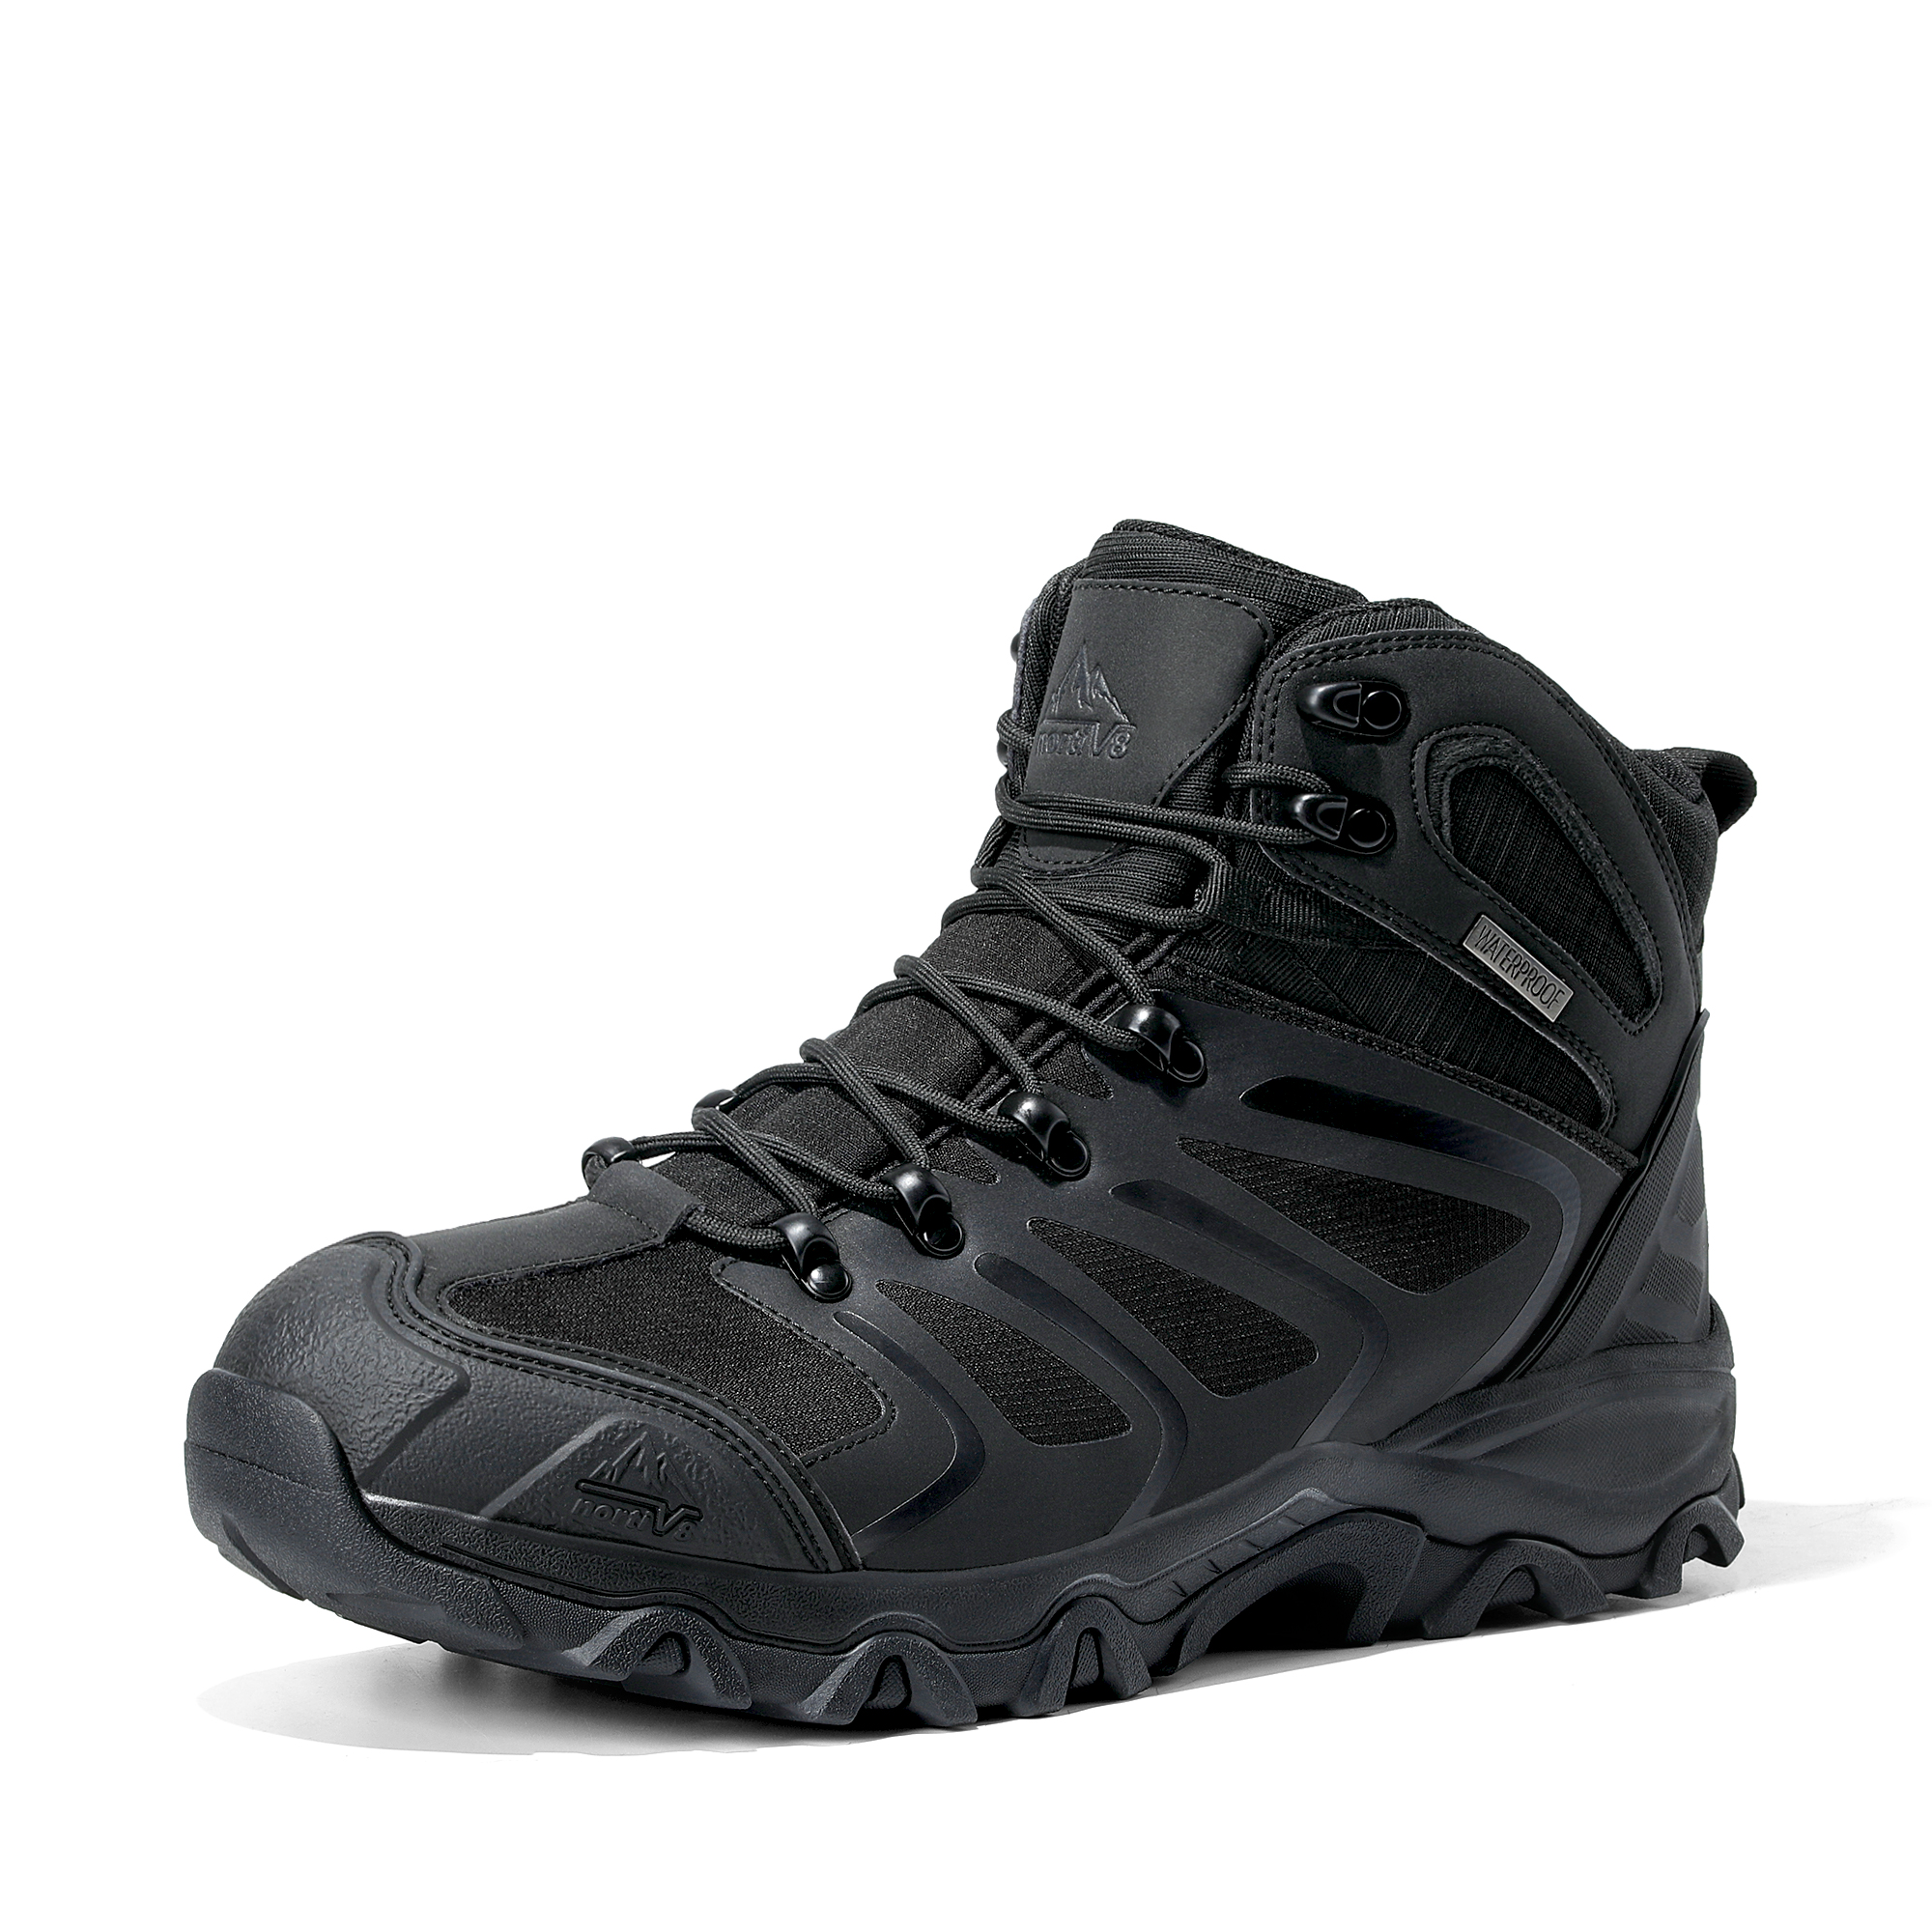 NORTIV 8 Men's Ankle High Waterproof Hiking Boots Outdoor